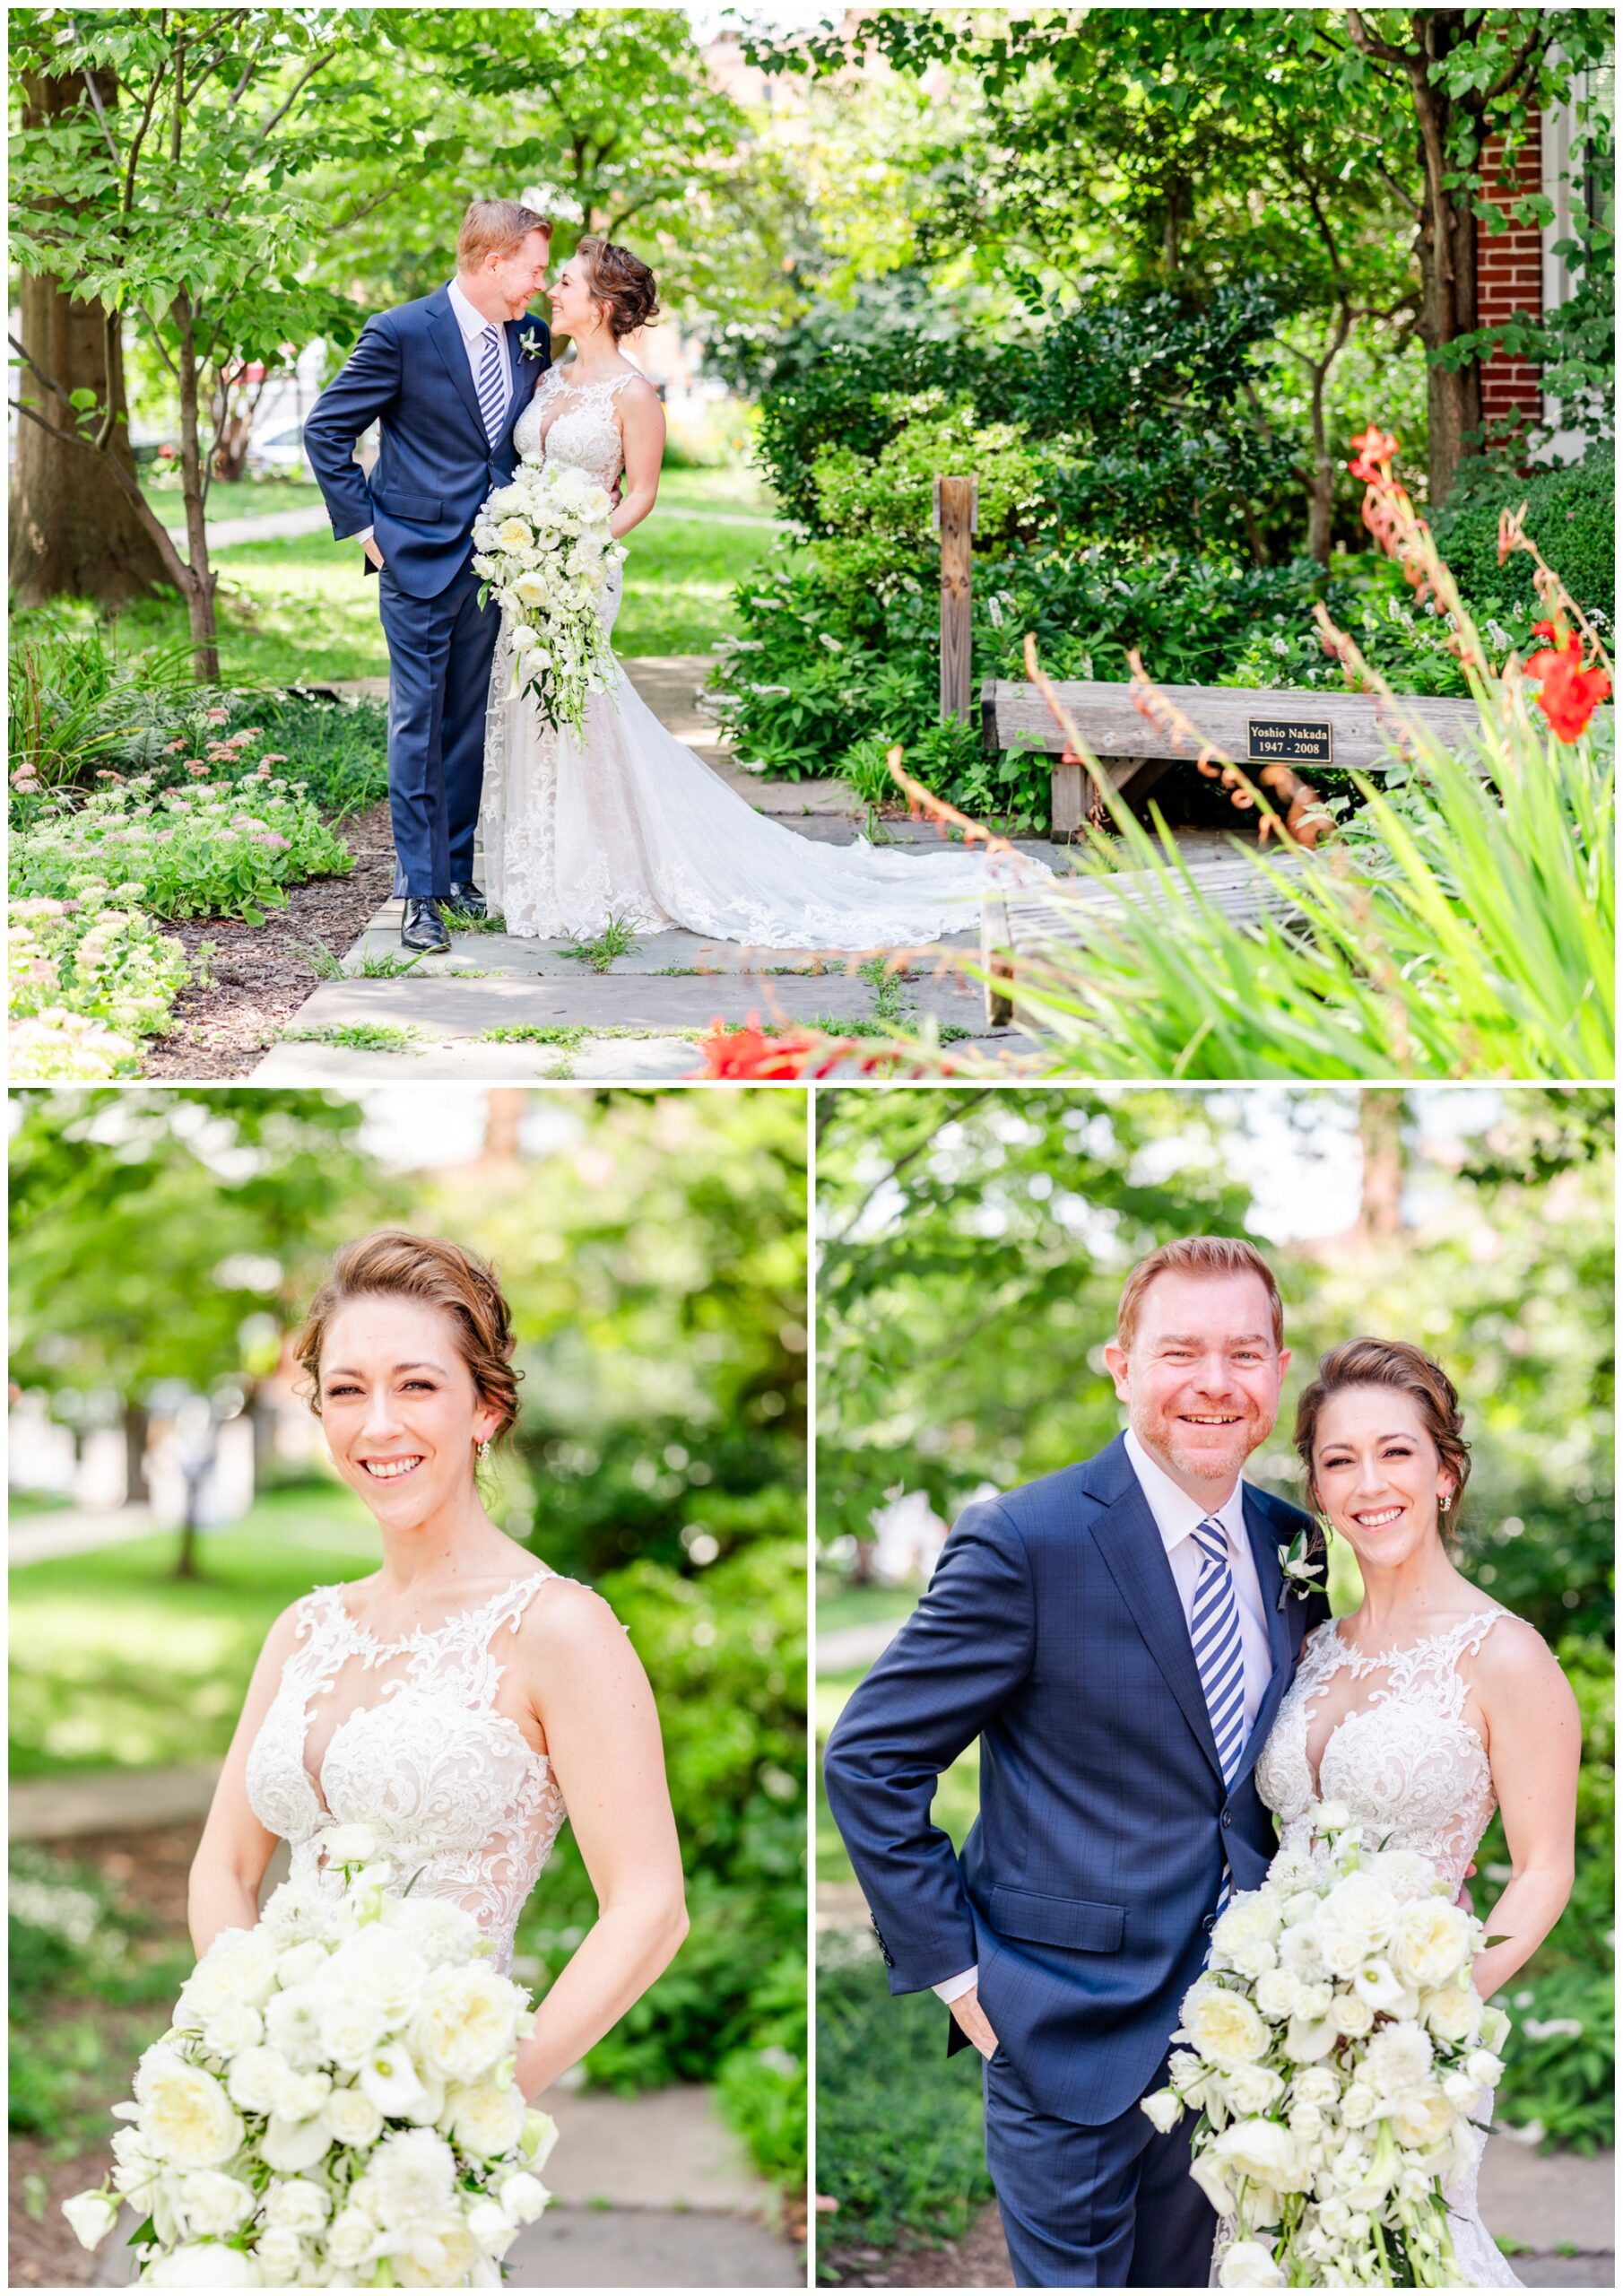 romantic Ritz Carlton Georgetown wedding, summer wedding aesthetic, green and white aesthetic, summer D.C. wedding, D.C. wedding venues, Ritz Carlton wedding, Washington D.C. wedding, romantic wedding aesthetic, Georgetown wedding, Rachel E.H. Photography, D.C. photographer, bride and groom portrait, couple smiling in garden, white bouquet